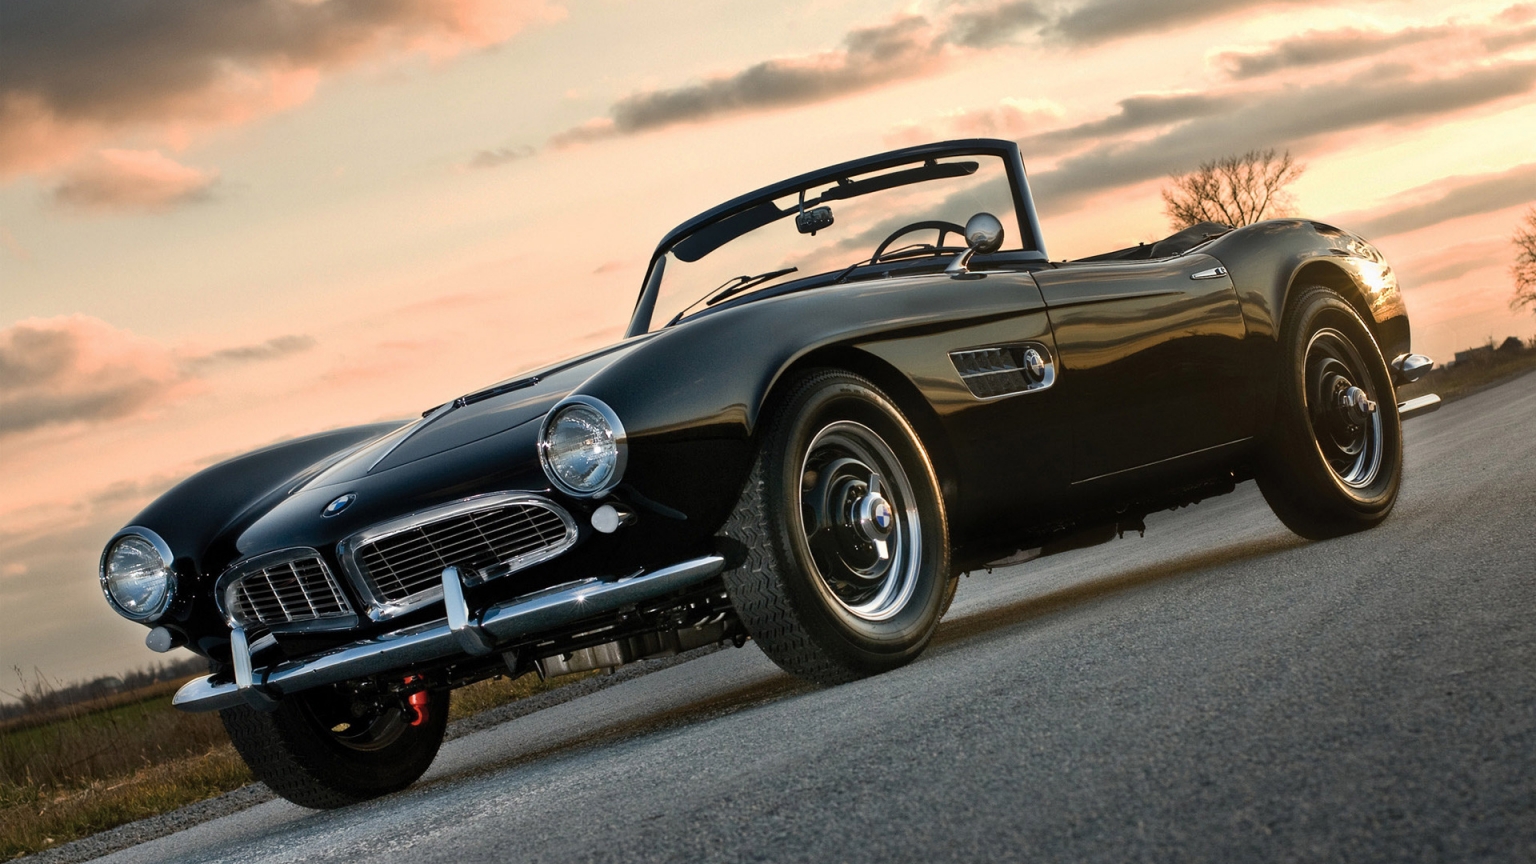 Amazing BMW 507 from 1957 for 1536 x 864 HDTV resolution